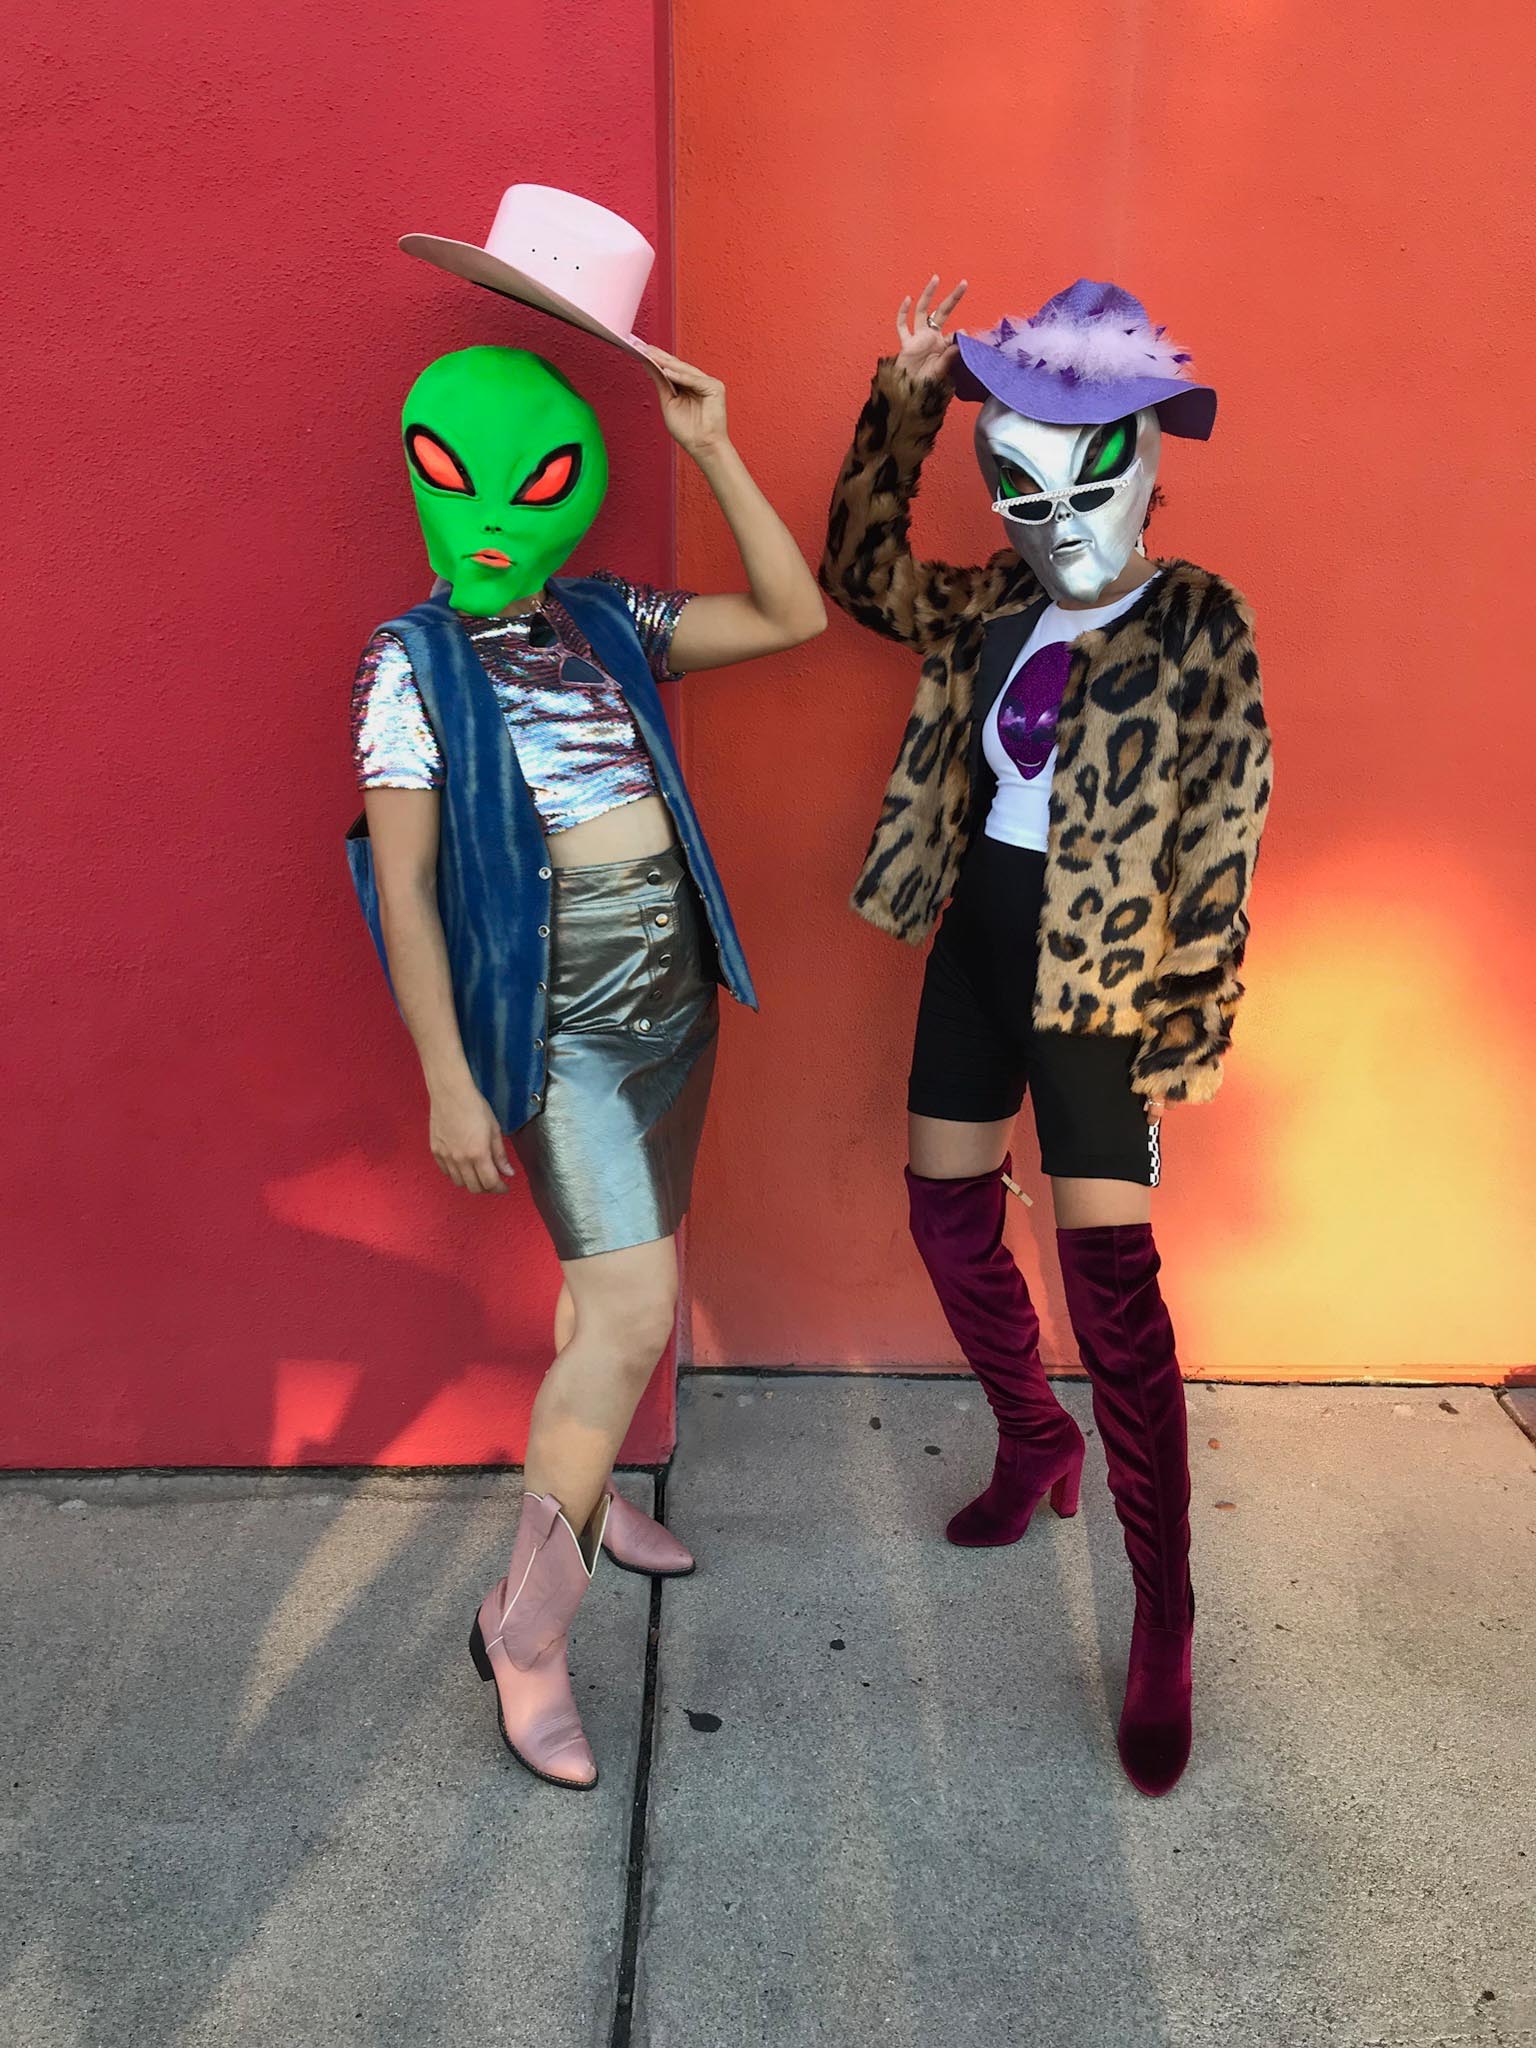 2 People in front of red and orange wall dressed as space cowgirls & wearing alien masks